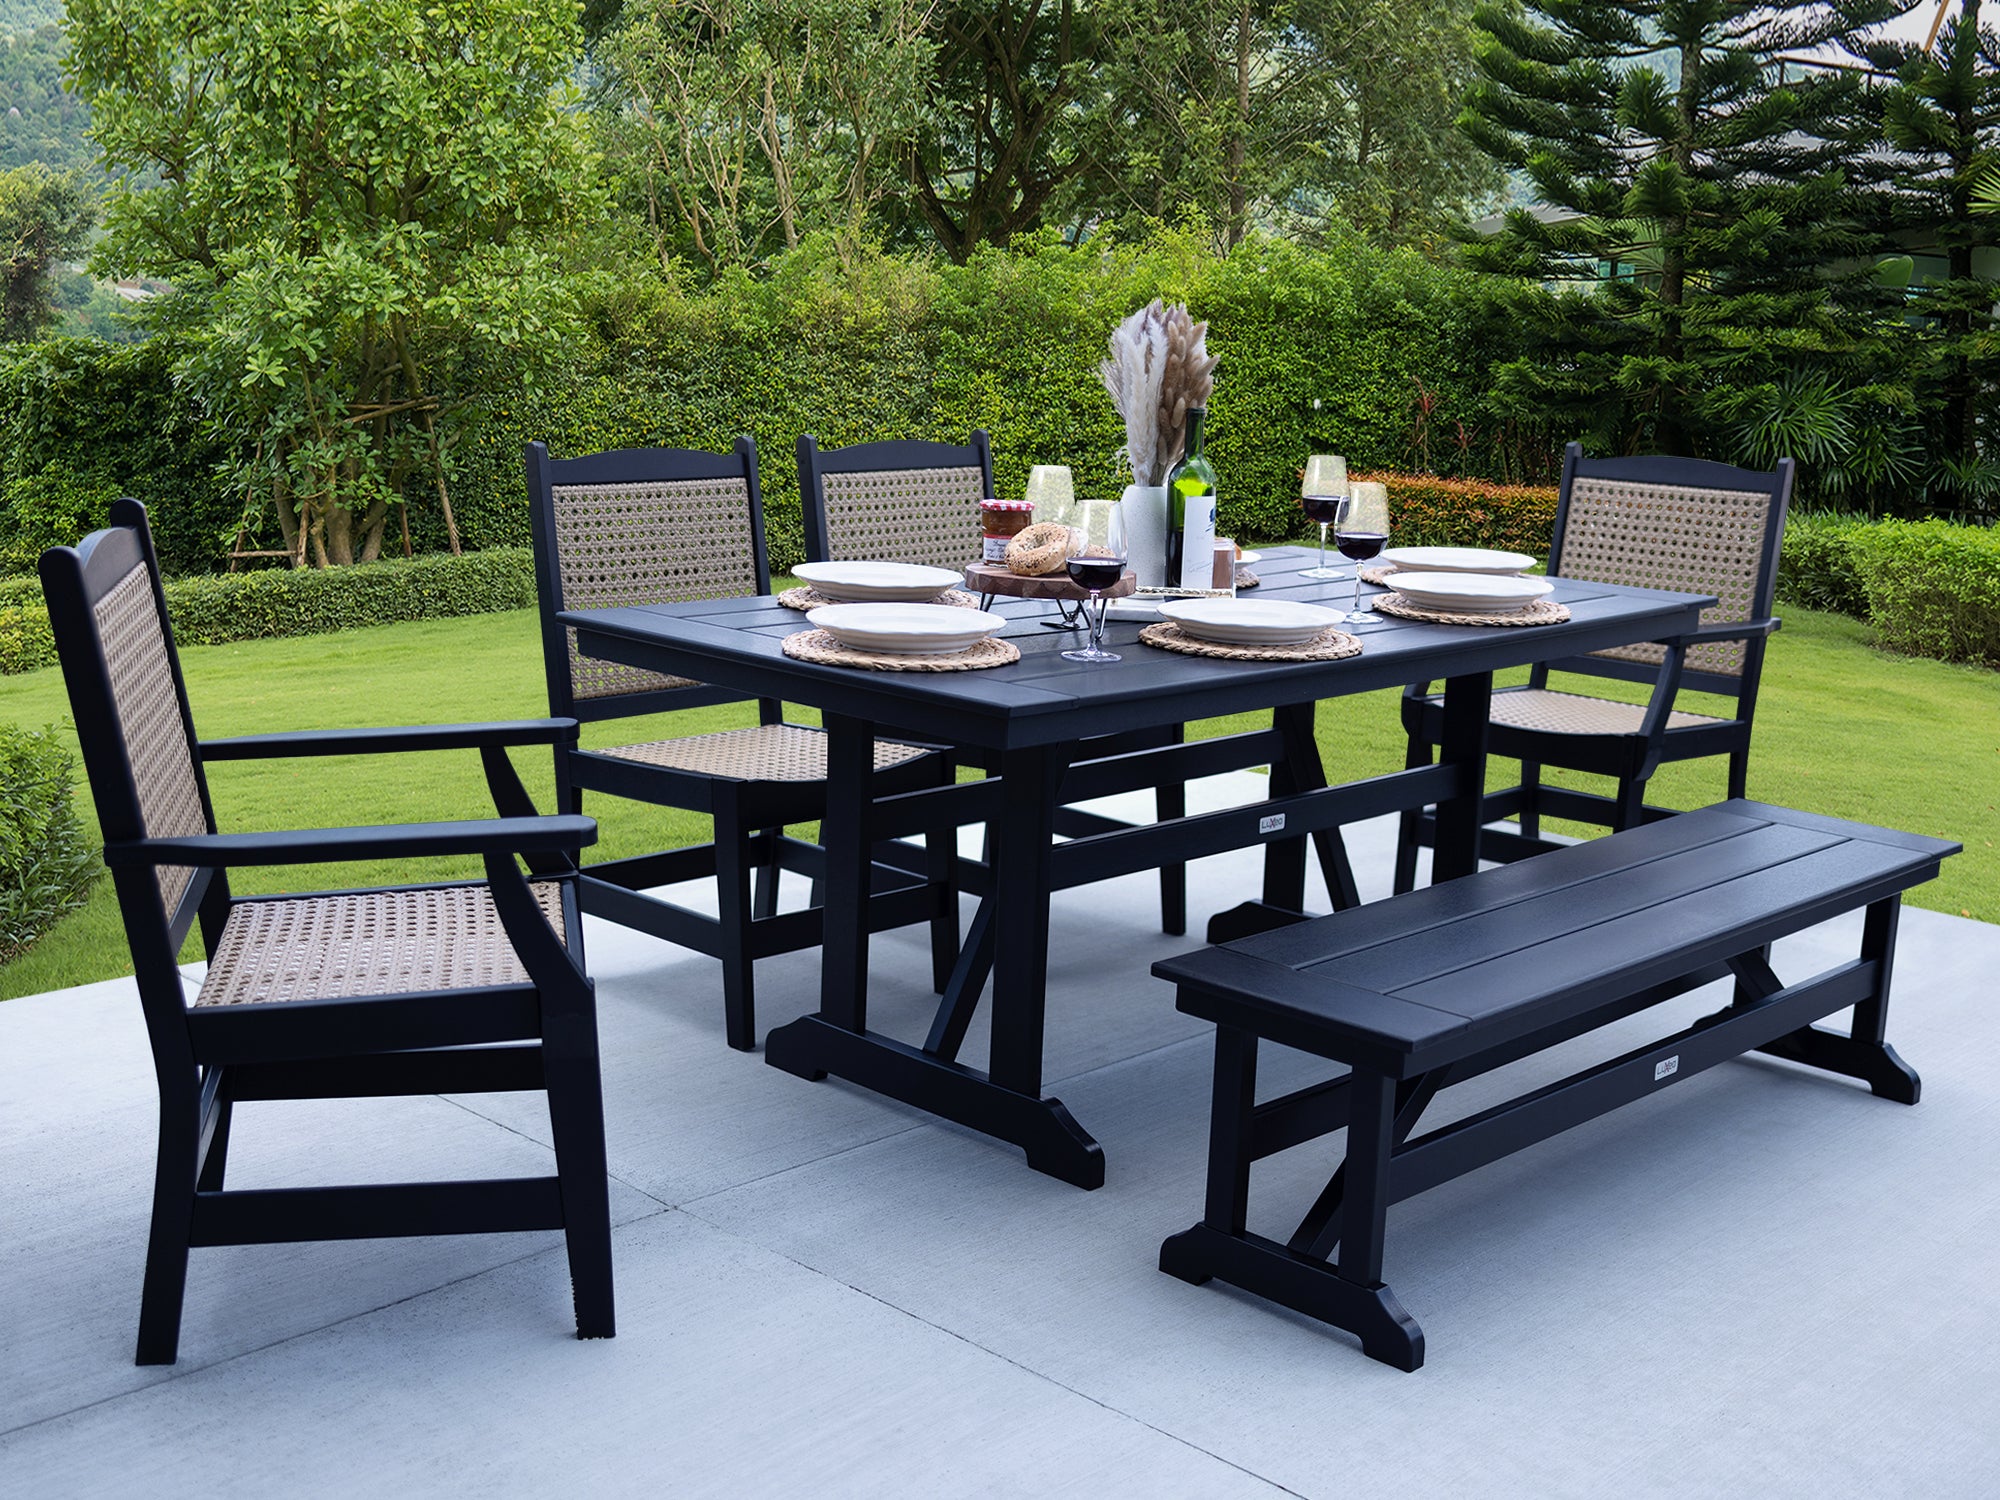 LuXeo Tuscany Woven Rattan Dining Set, 6-Piece